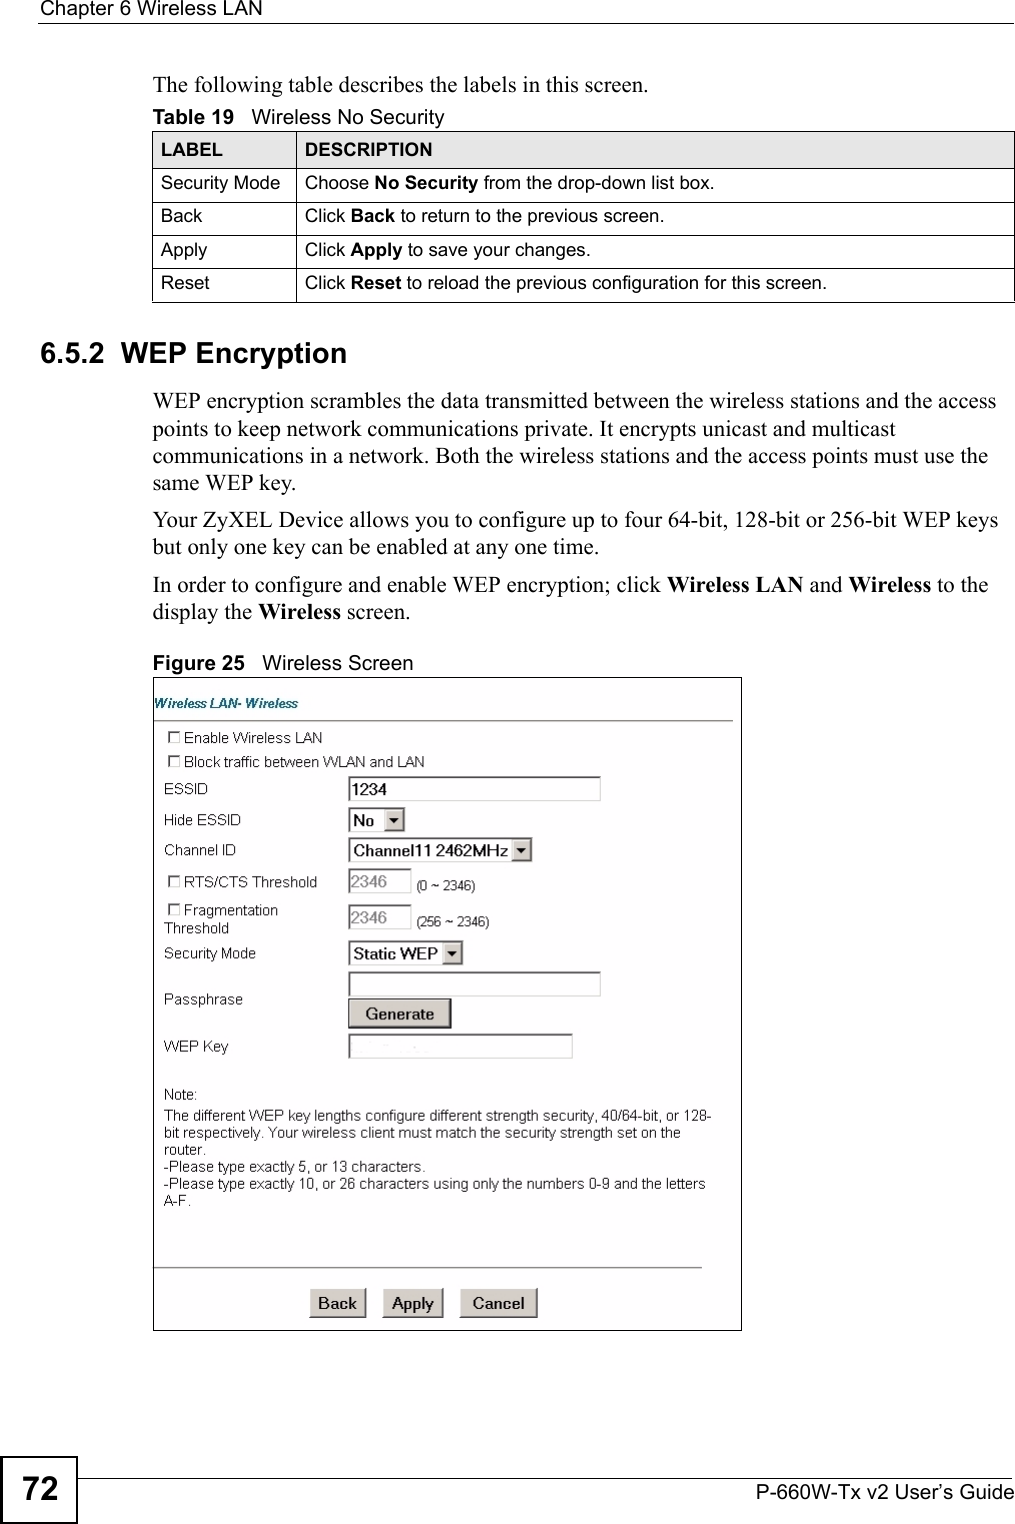 Chapter 6 Wireless LANP-660W-Tx v2 User’s Guide72The following table describes the labels in this screen.6.5.2  WEP EncryptionWEP encryption scrambles the data transmitted between the wireless stations and the access points to keep network communications private. It encrypts unicast and multicast communications in a network. Both the wireless stations and the access points must use the same WEP key. Your ZyXEL Device allows you to configure up to four 64-bit, 128-bit or 256-bit WEP keys but only one key can be enabled at any one time. In order to configure and enable WEP encryption; click Wireless LAN and Wireless to the display the Wireless screen.Figure 25   Wireless ScreenTable 19   Wireless No SecurityLABEL DESCRIPTIONSecurity Mode Choose No Security from the drop-down list box.Back  Click Back to return to the previous screen.Apply Click Apply to save your changes.Reset Click Reset to reload the previous configuration for this screen.